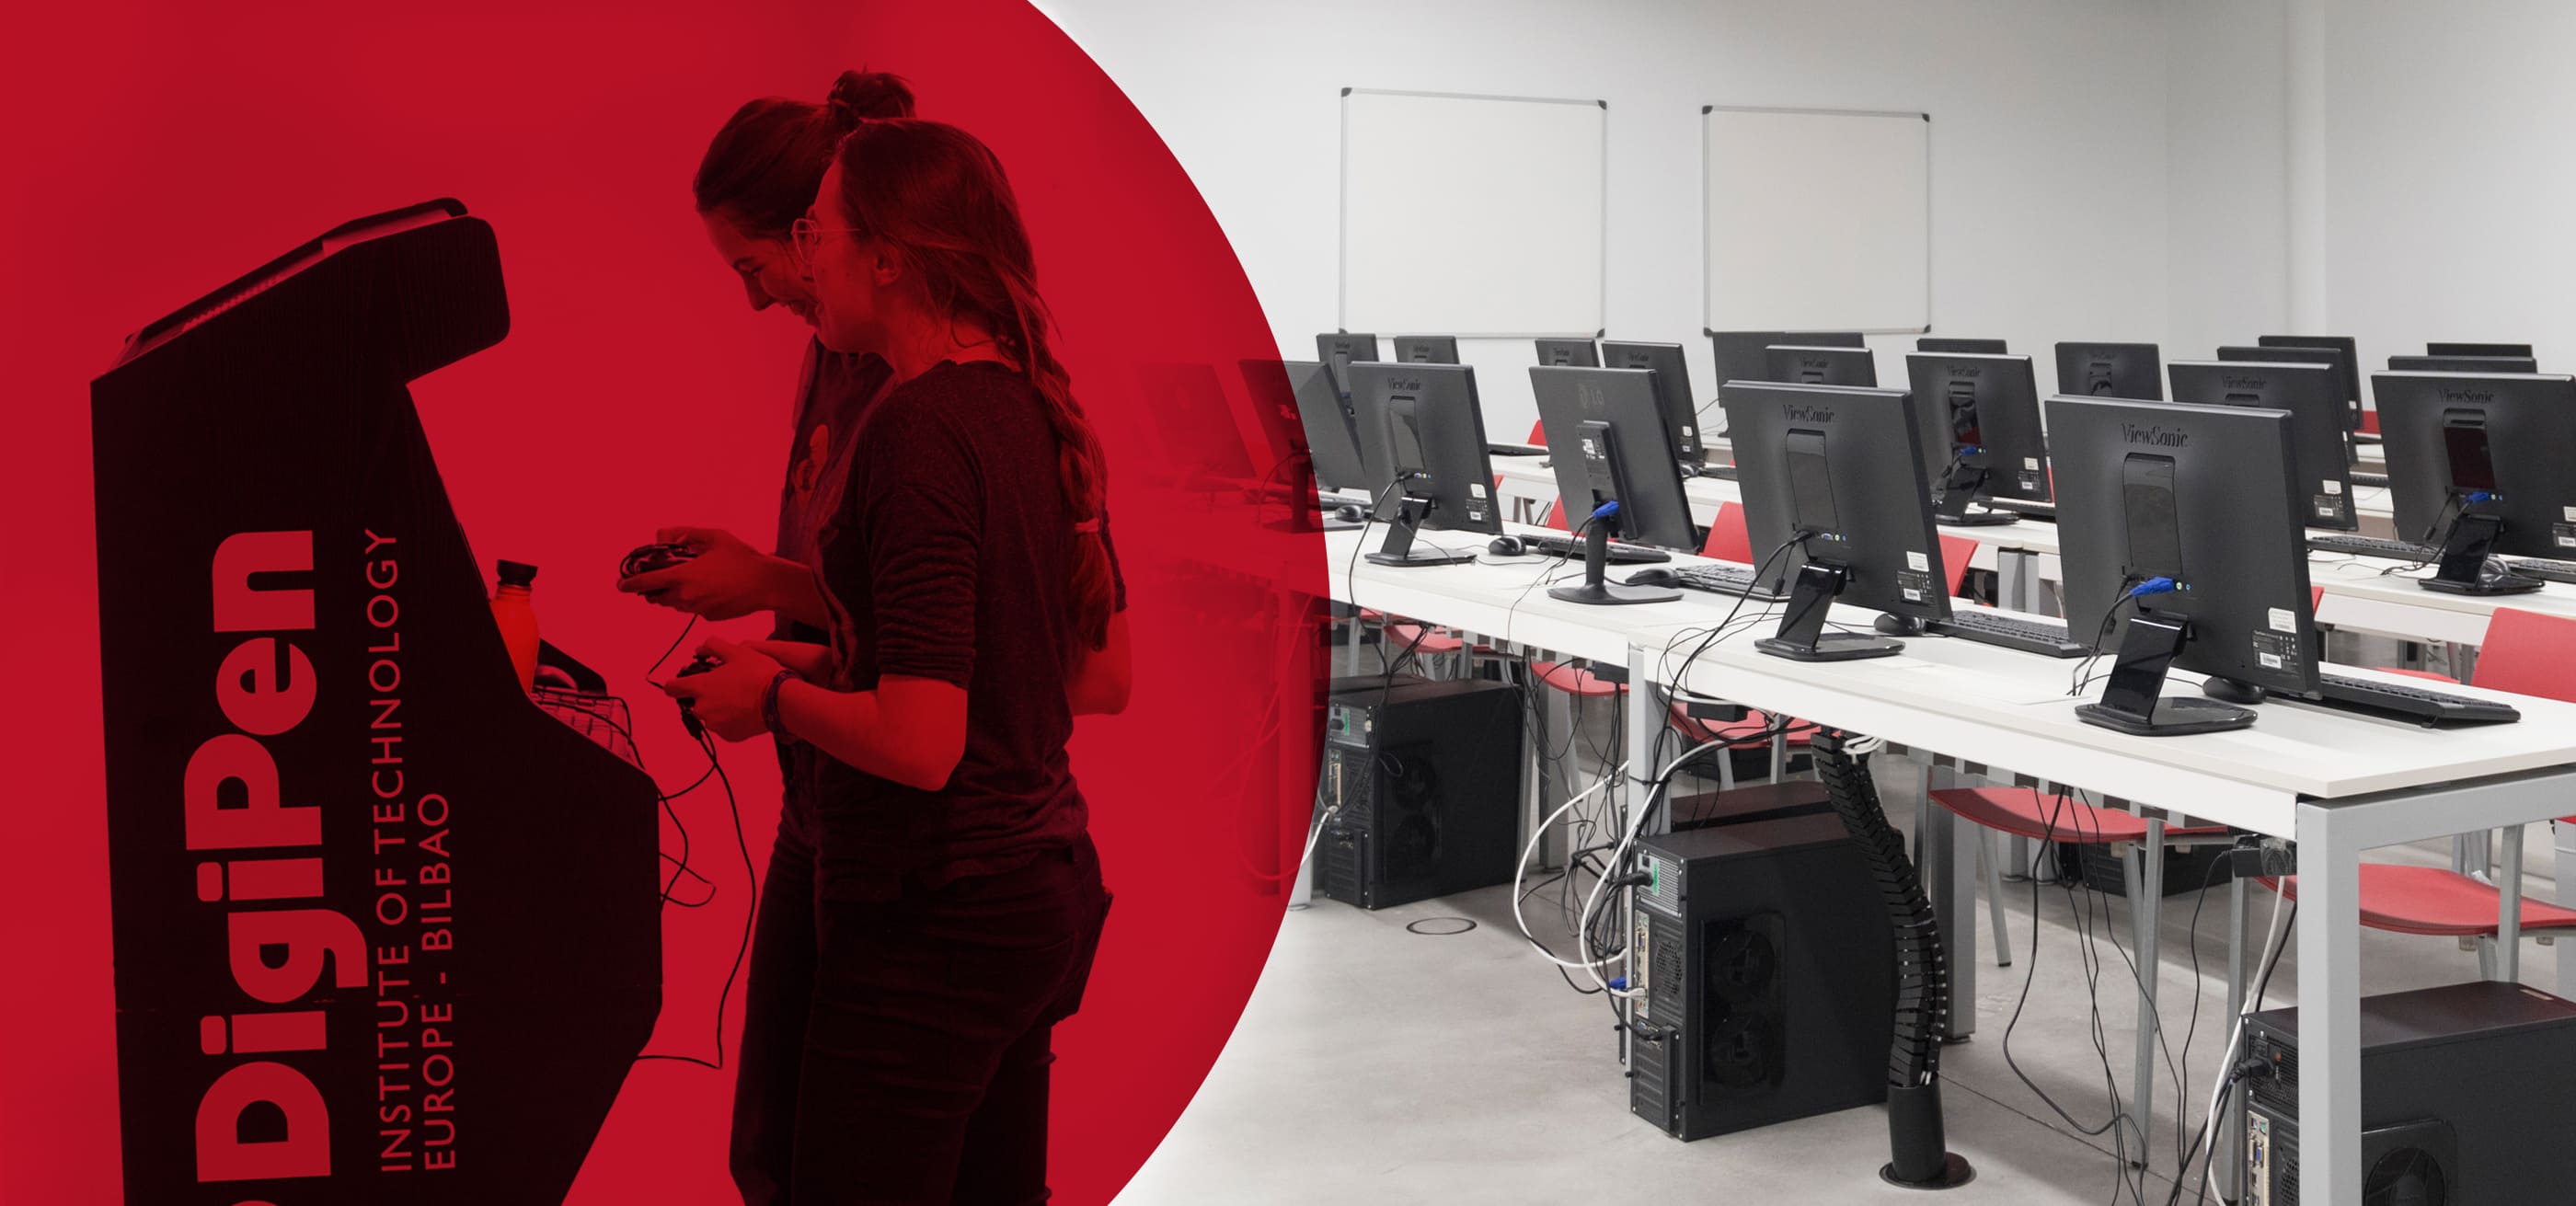 Two students playing Arcade Games with a red background and facilities of a computer classroom at DigiPen Europe Bilbao.